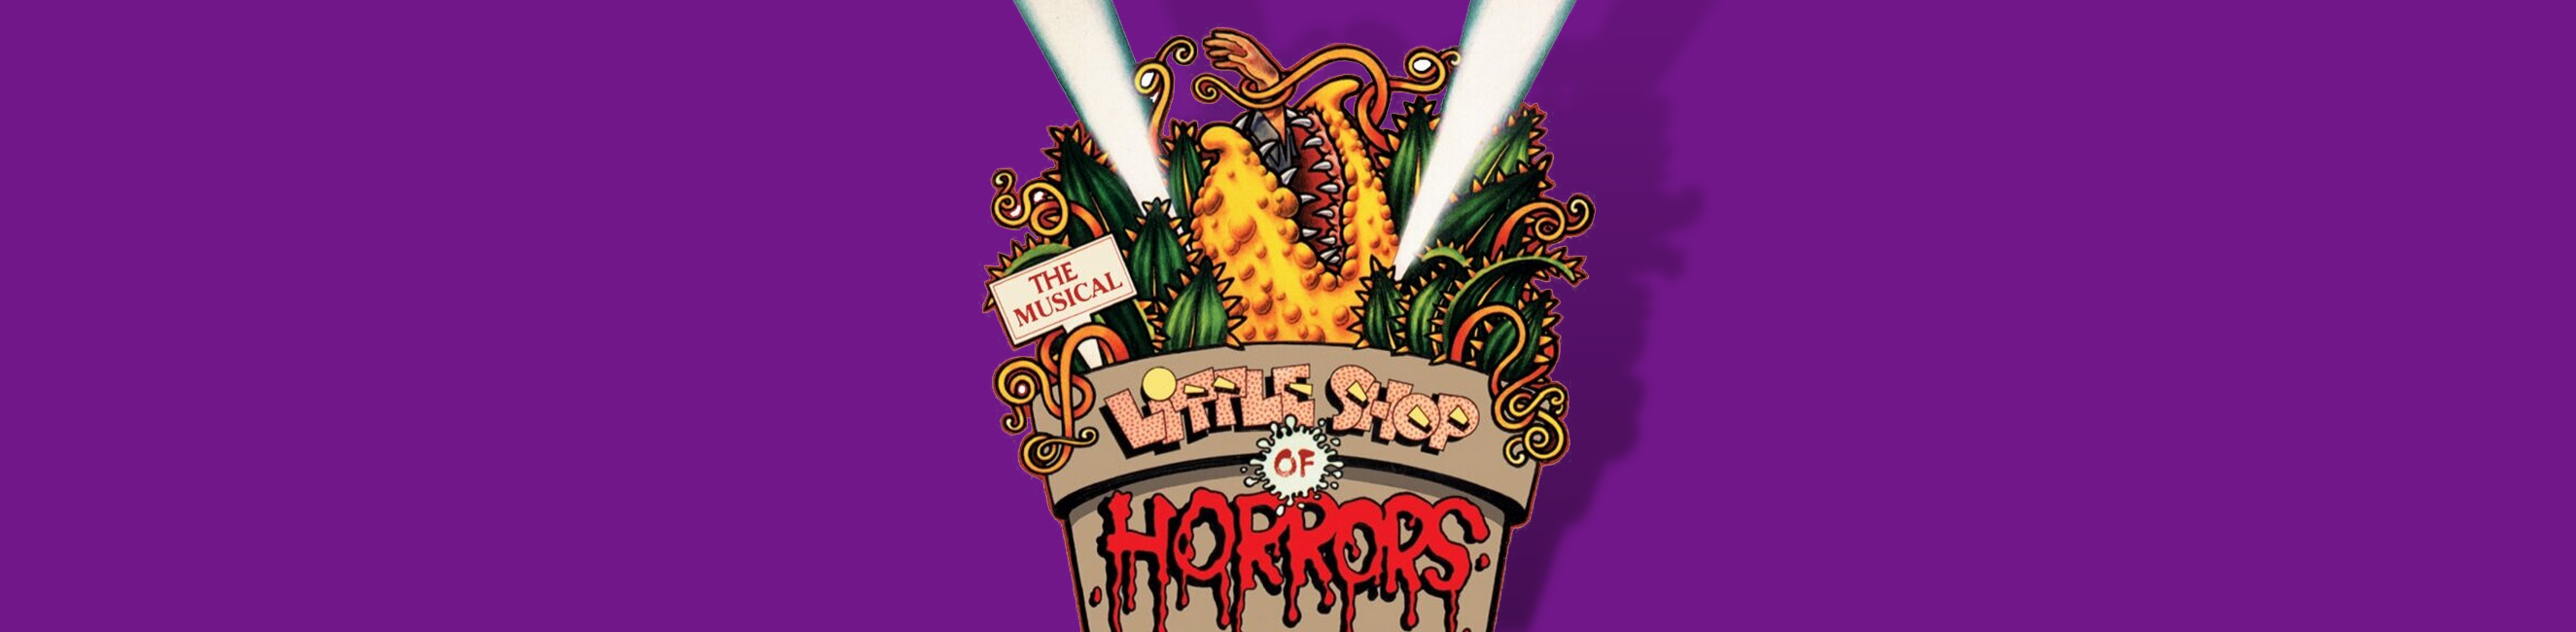 little shop of horrors poster with man eating plant